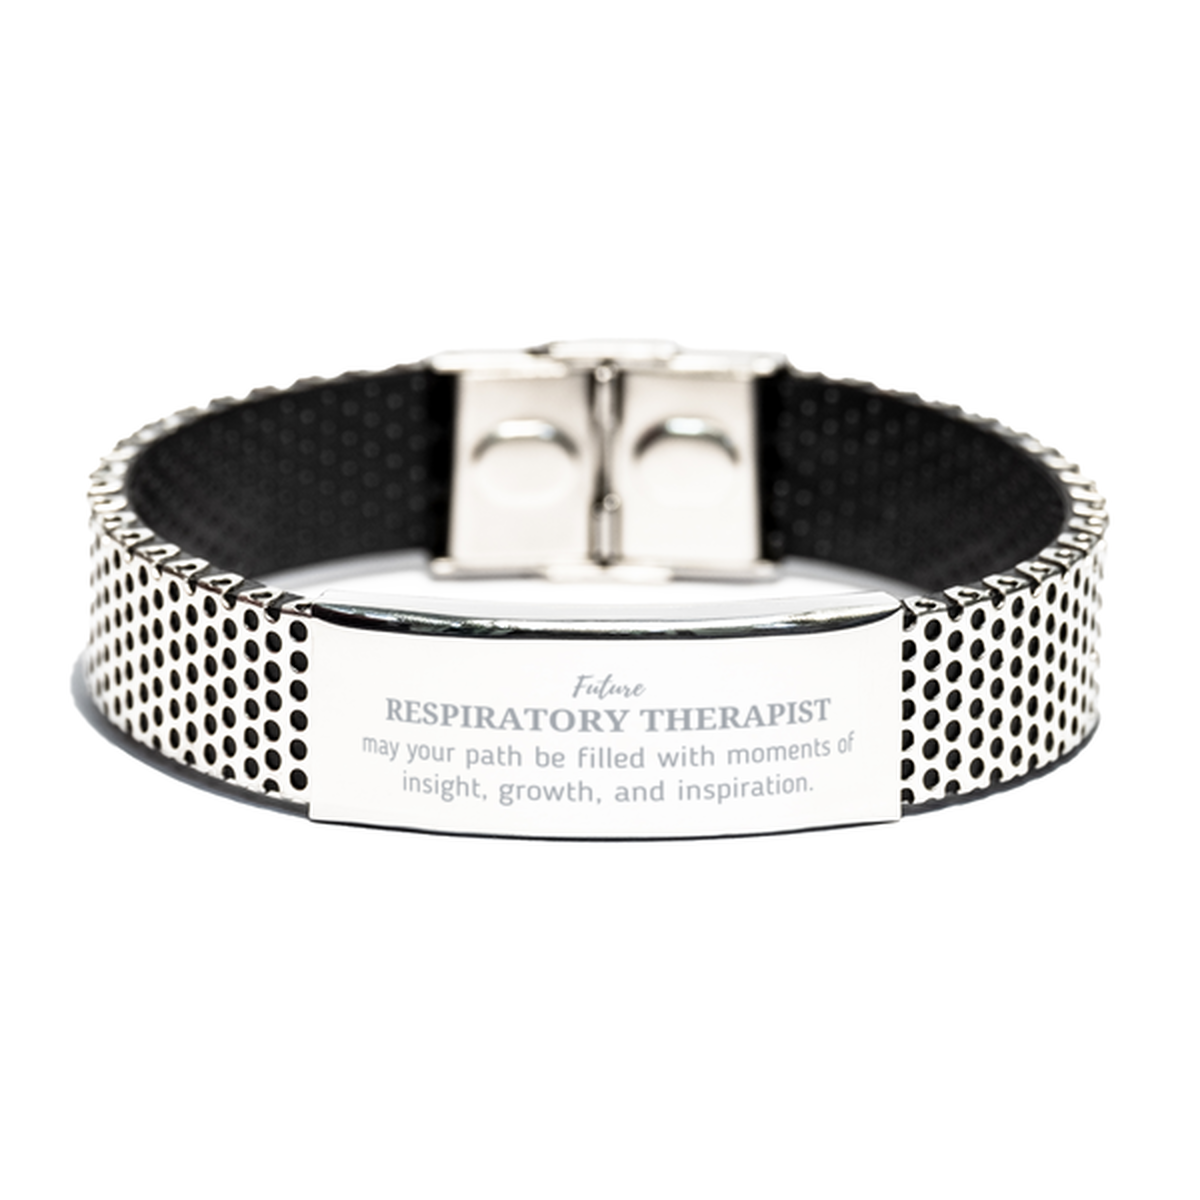 Future Respiratory Therapist Gifts, May your path be filled with moments of insight, Graduation Gifts for New Respiratory Therapist, Christmas Unique Stainless Steel Bracelet For Men, Women, Friends